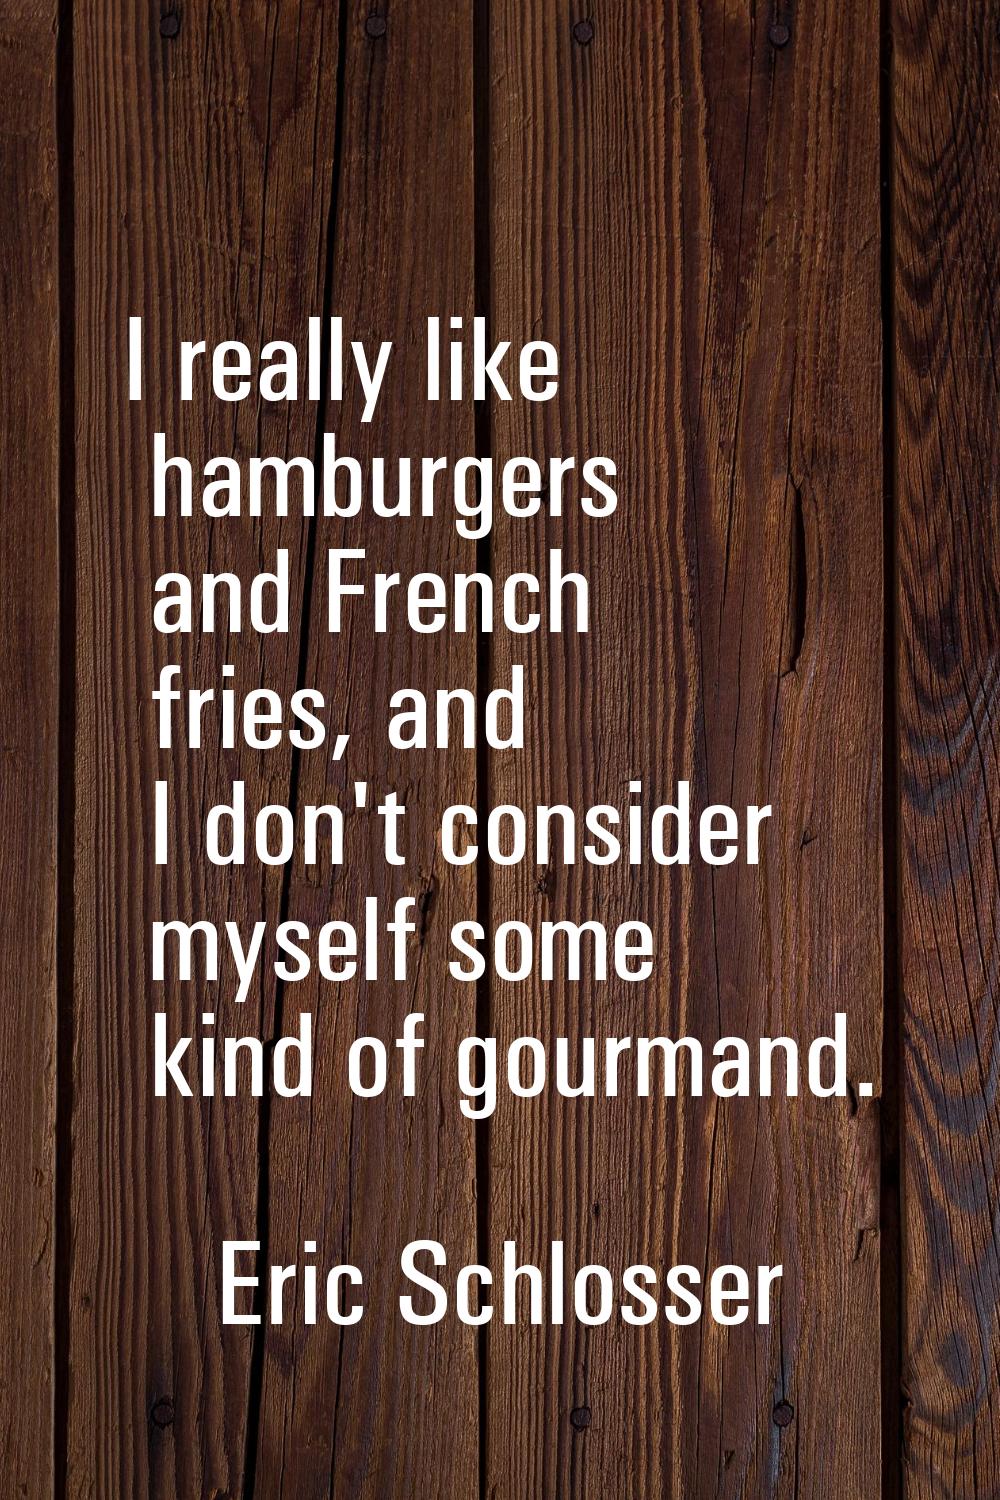 I really like hamburgers and French fries, and I don't consider myself some kind of gourmand.